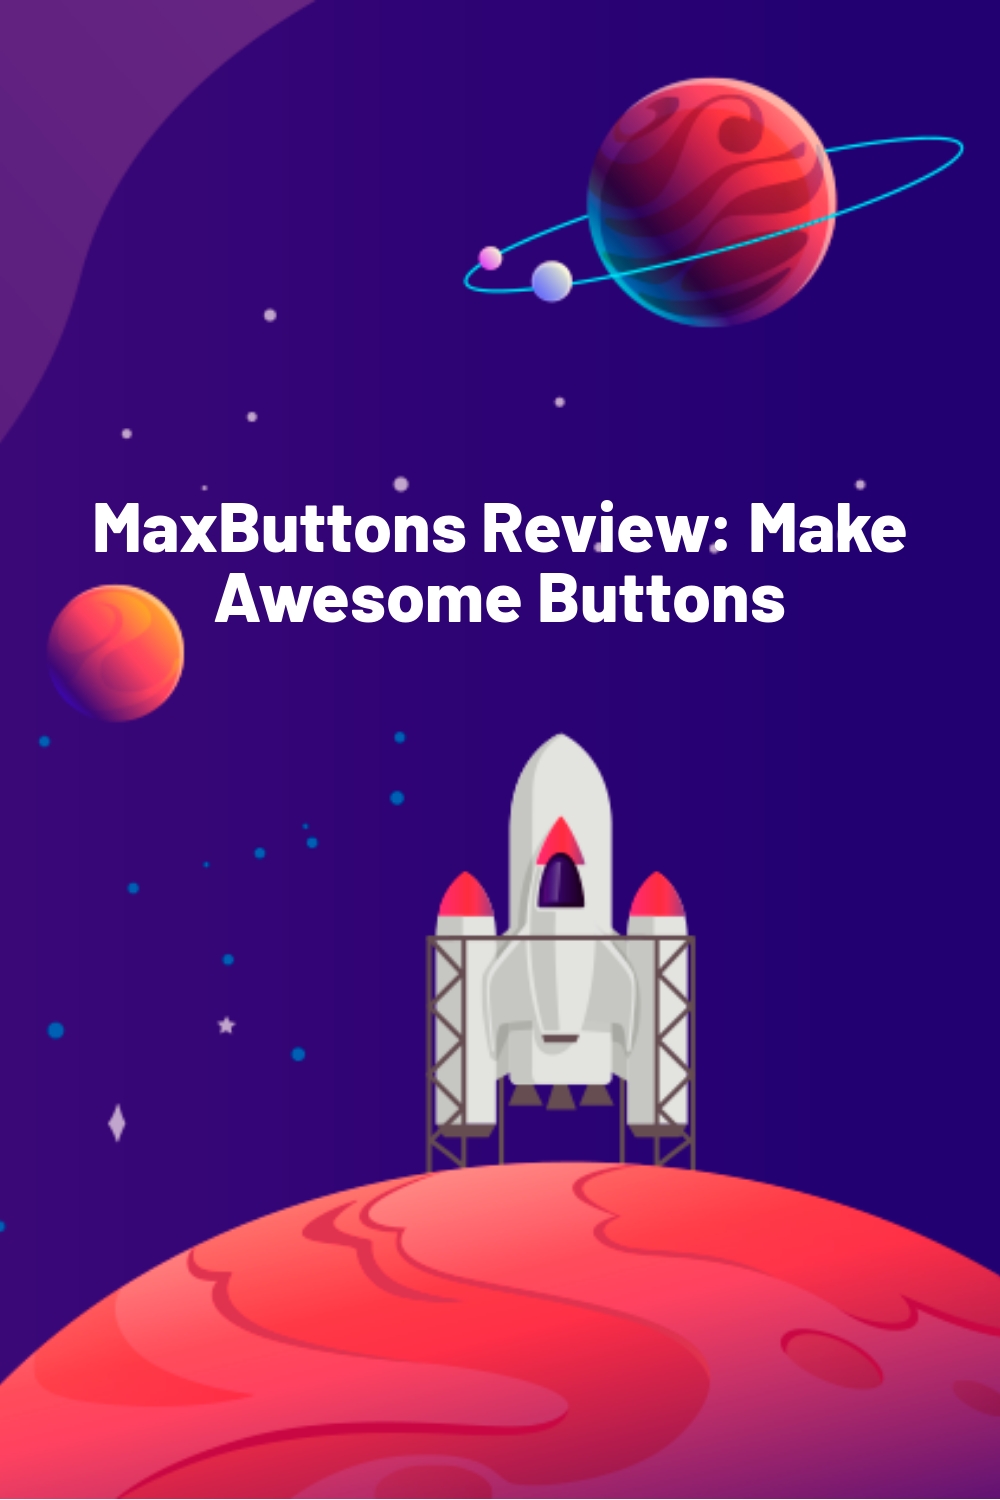 MaxButtons Review: Make Awesome Buttons